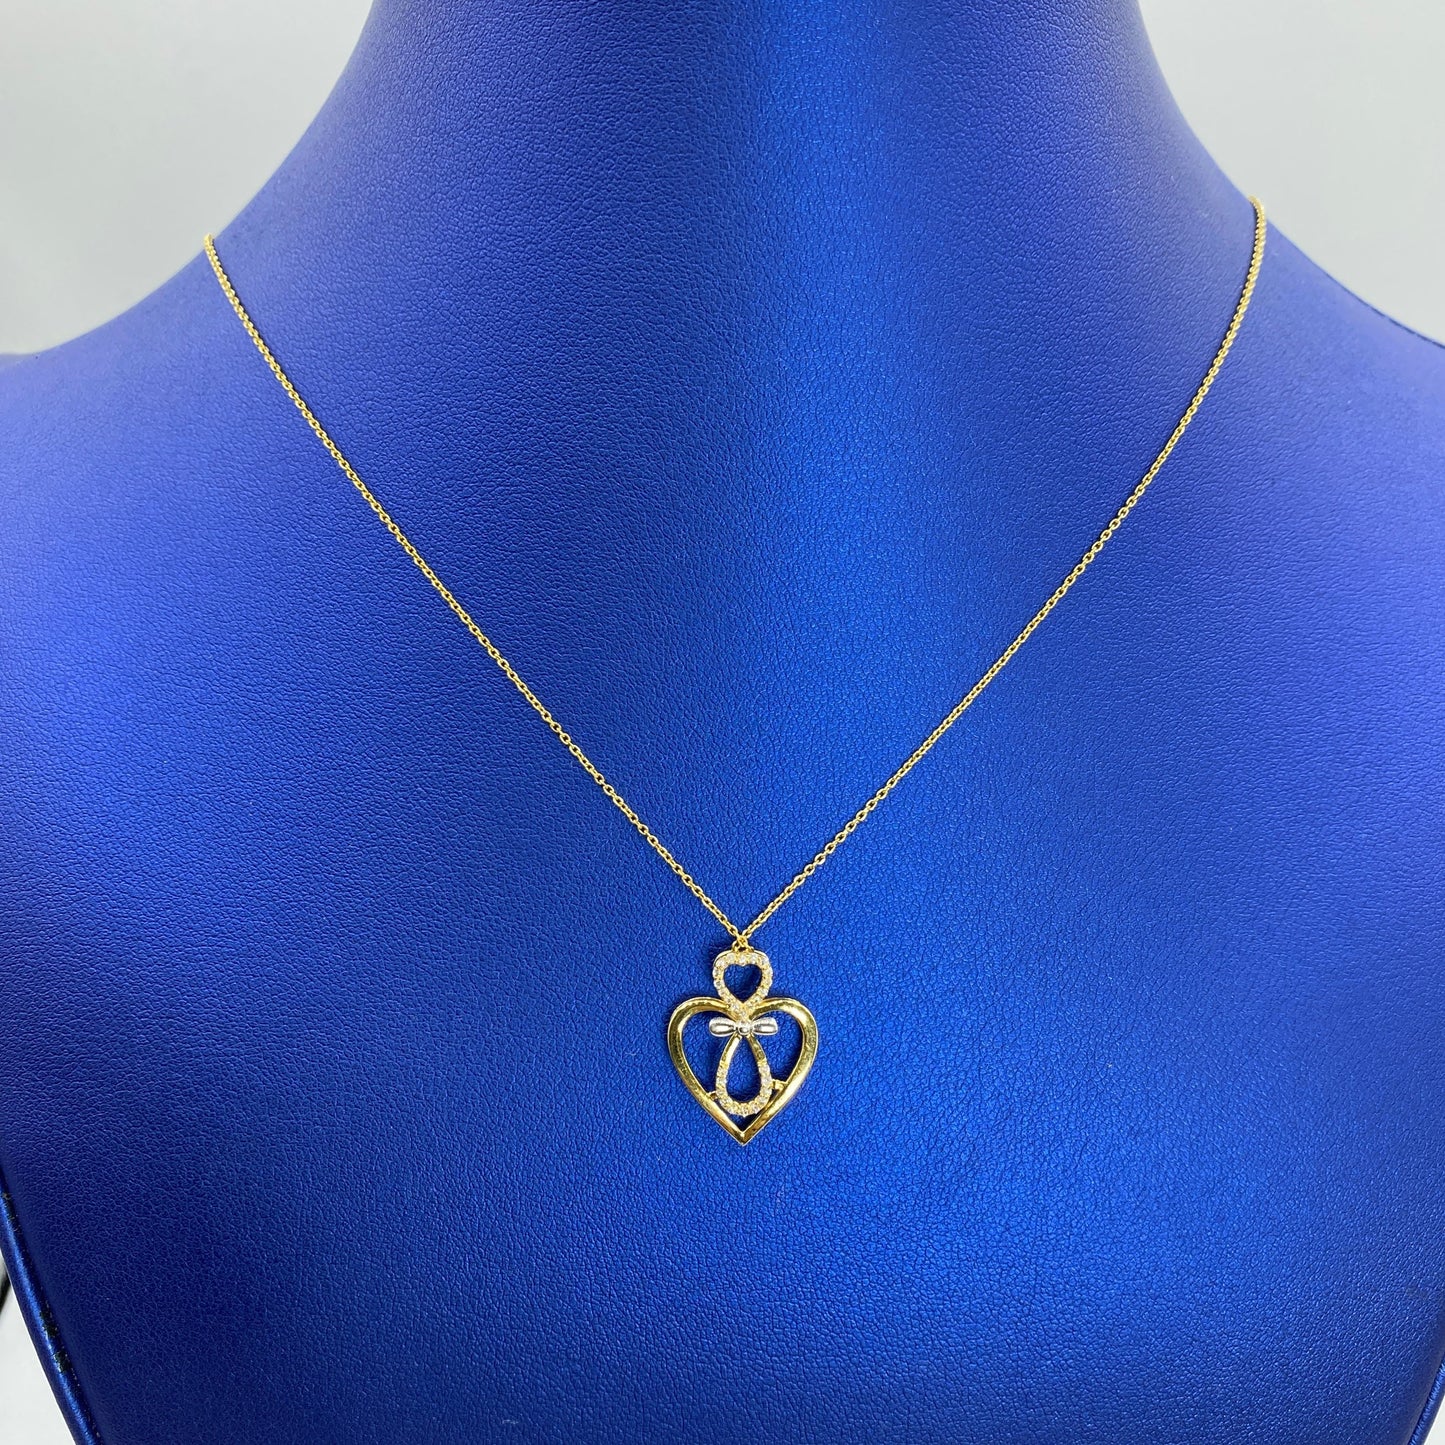 10K Gold and Diamond Heart Necklace